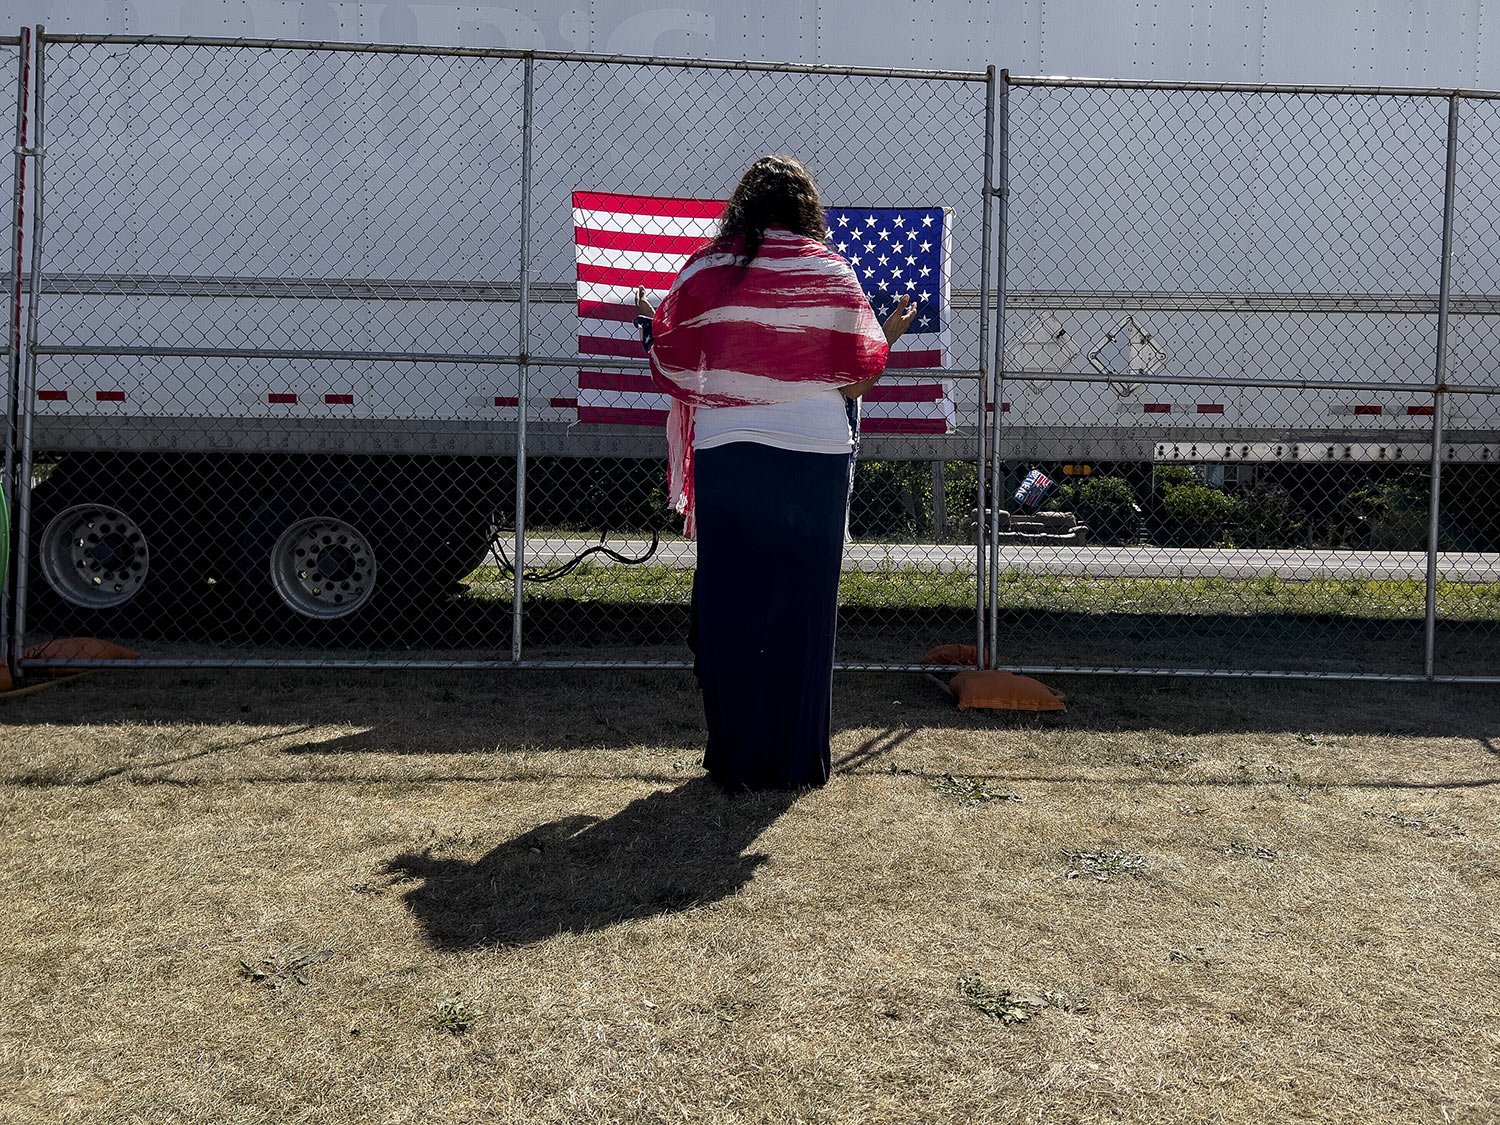  A woman prays facing a U.S. flag on the perimeter fence at the ReAwaken America Tour at Cornerstone Church in Batavia, N.Y., Aug. 13, 2022. (AP Photo/Carolyn Kaster) 